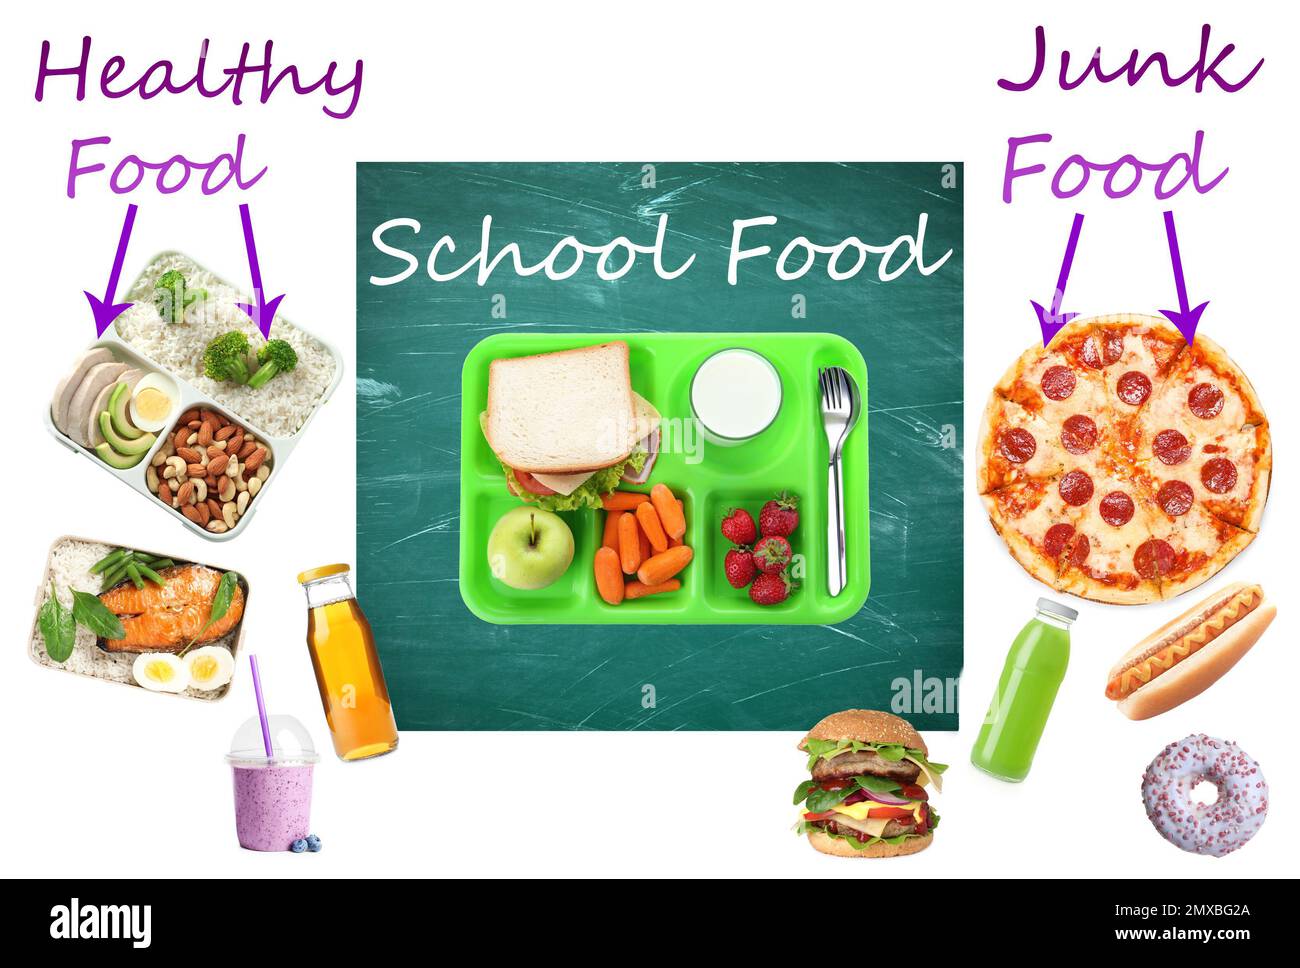 School food, healthy or junk. Different products as variants for lunch Stock Photo